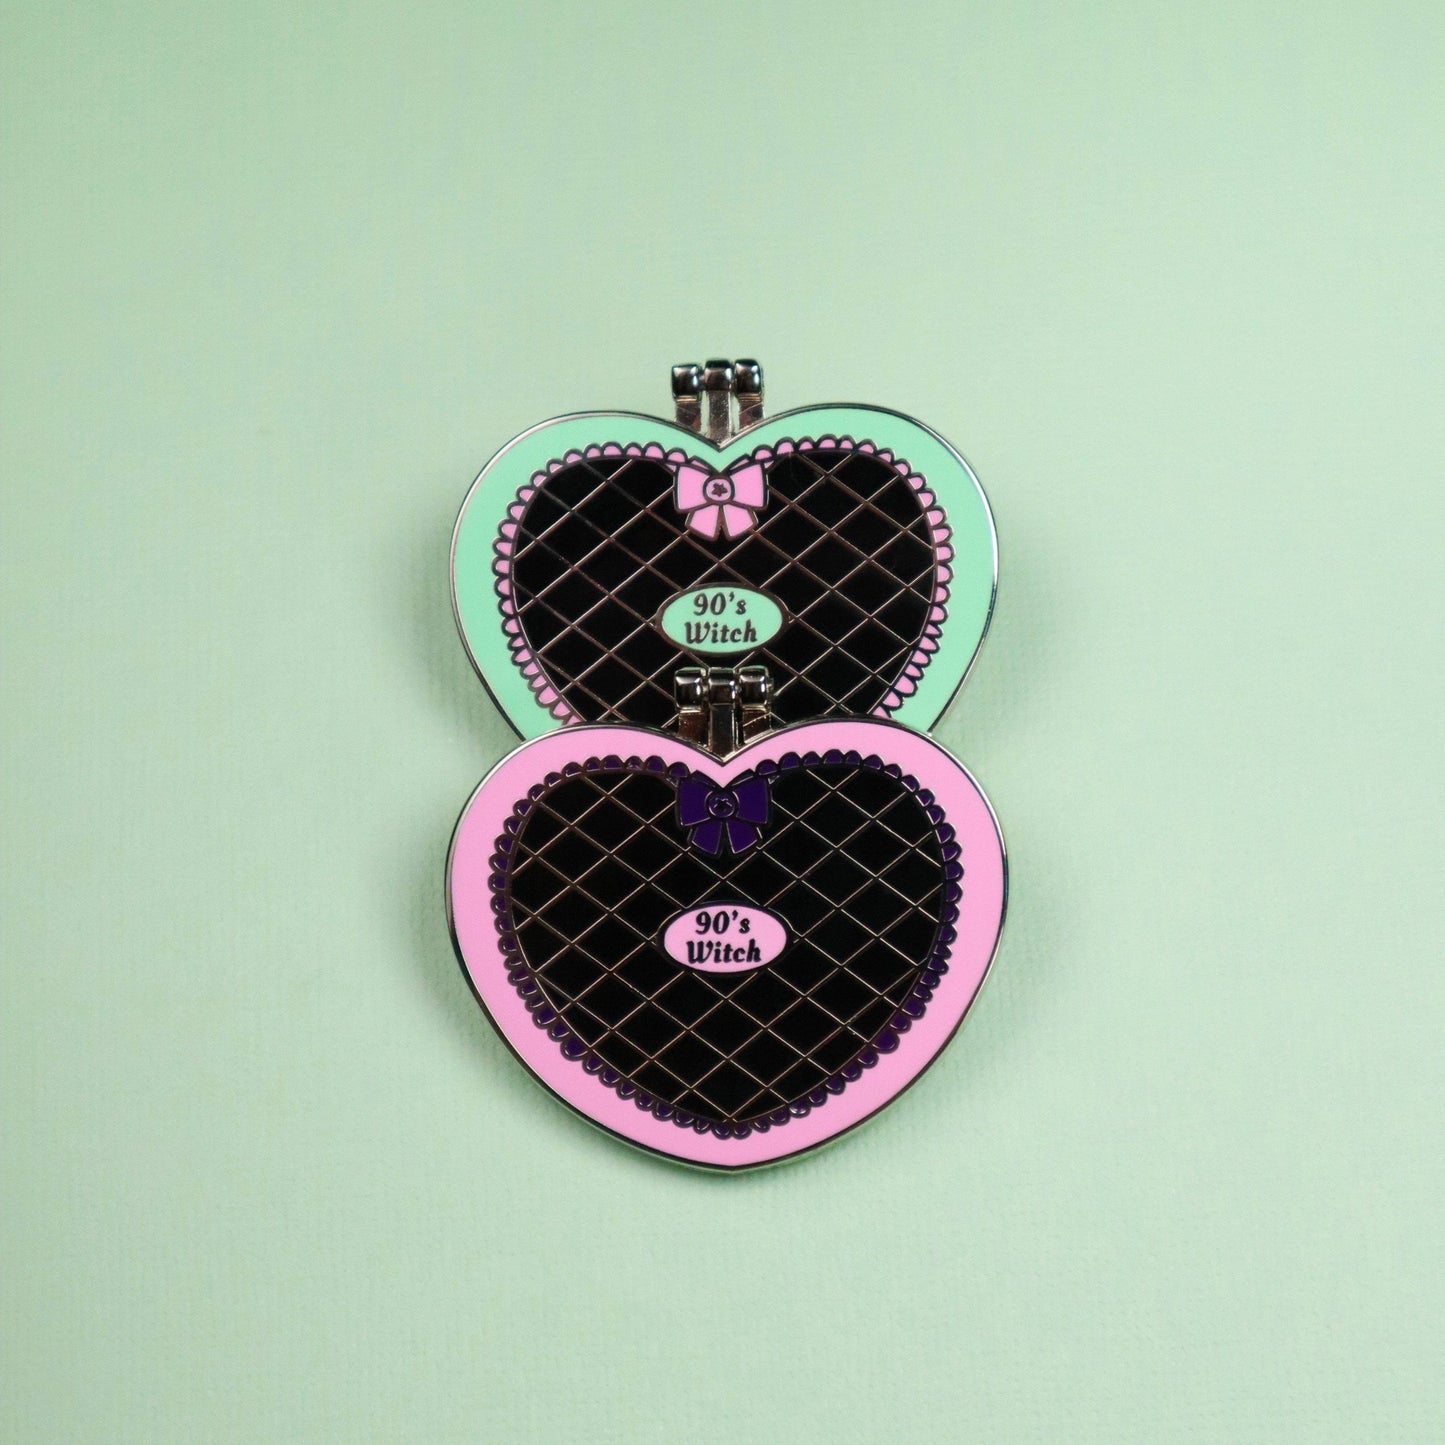 90's Witch Polly Pocket Style Open and Close Pin Brooch Heart-Shaped Locket